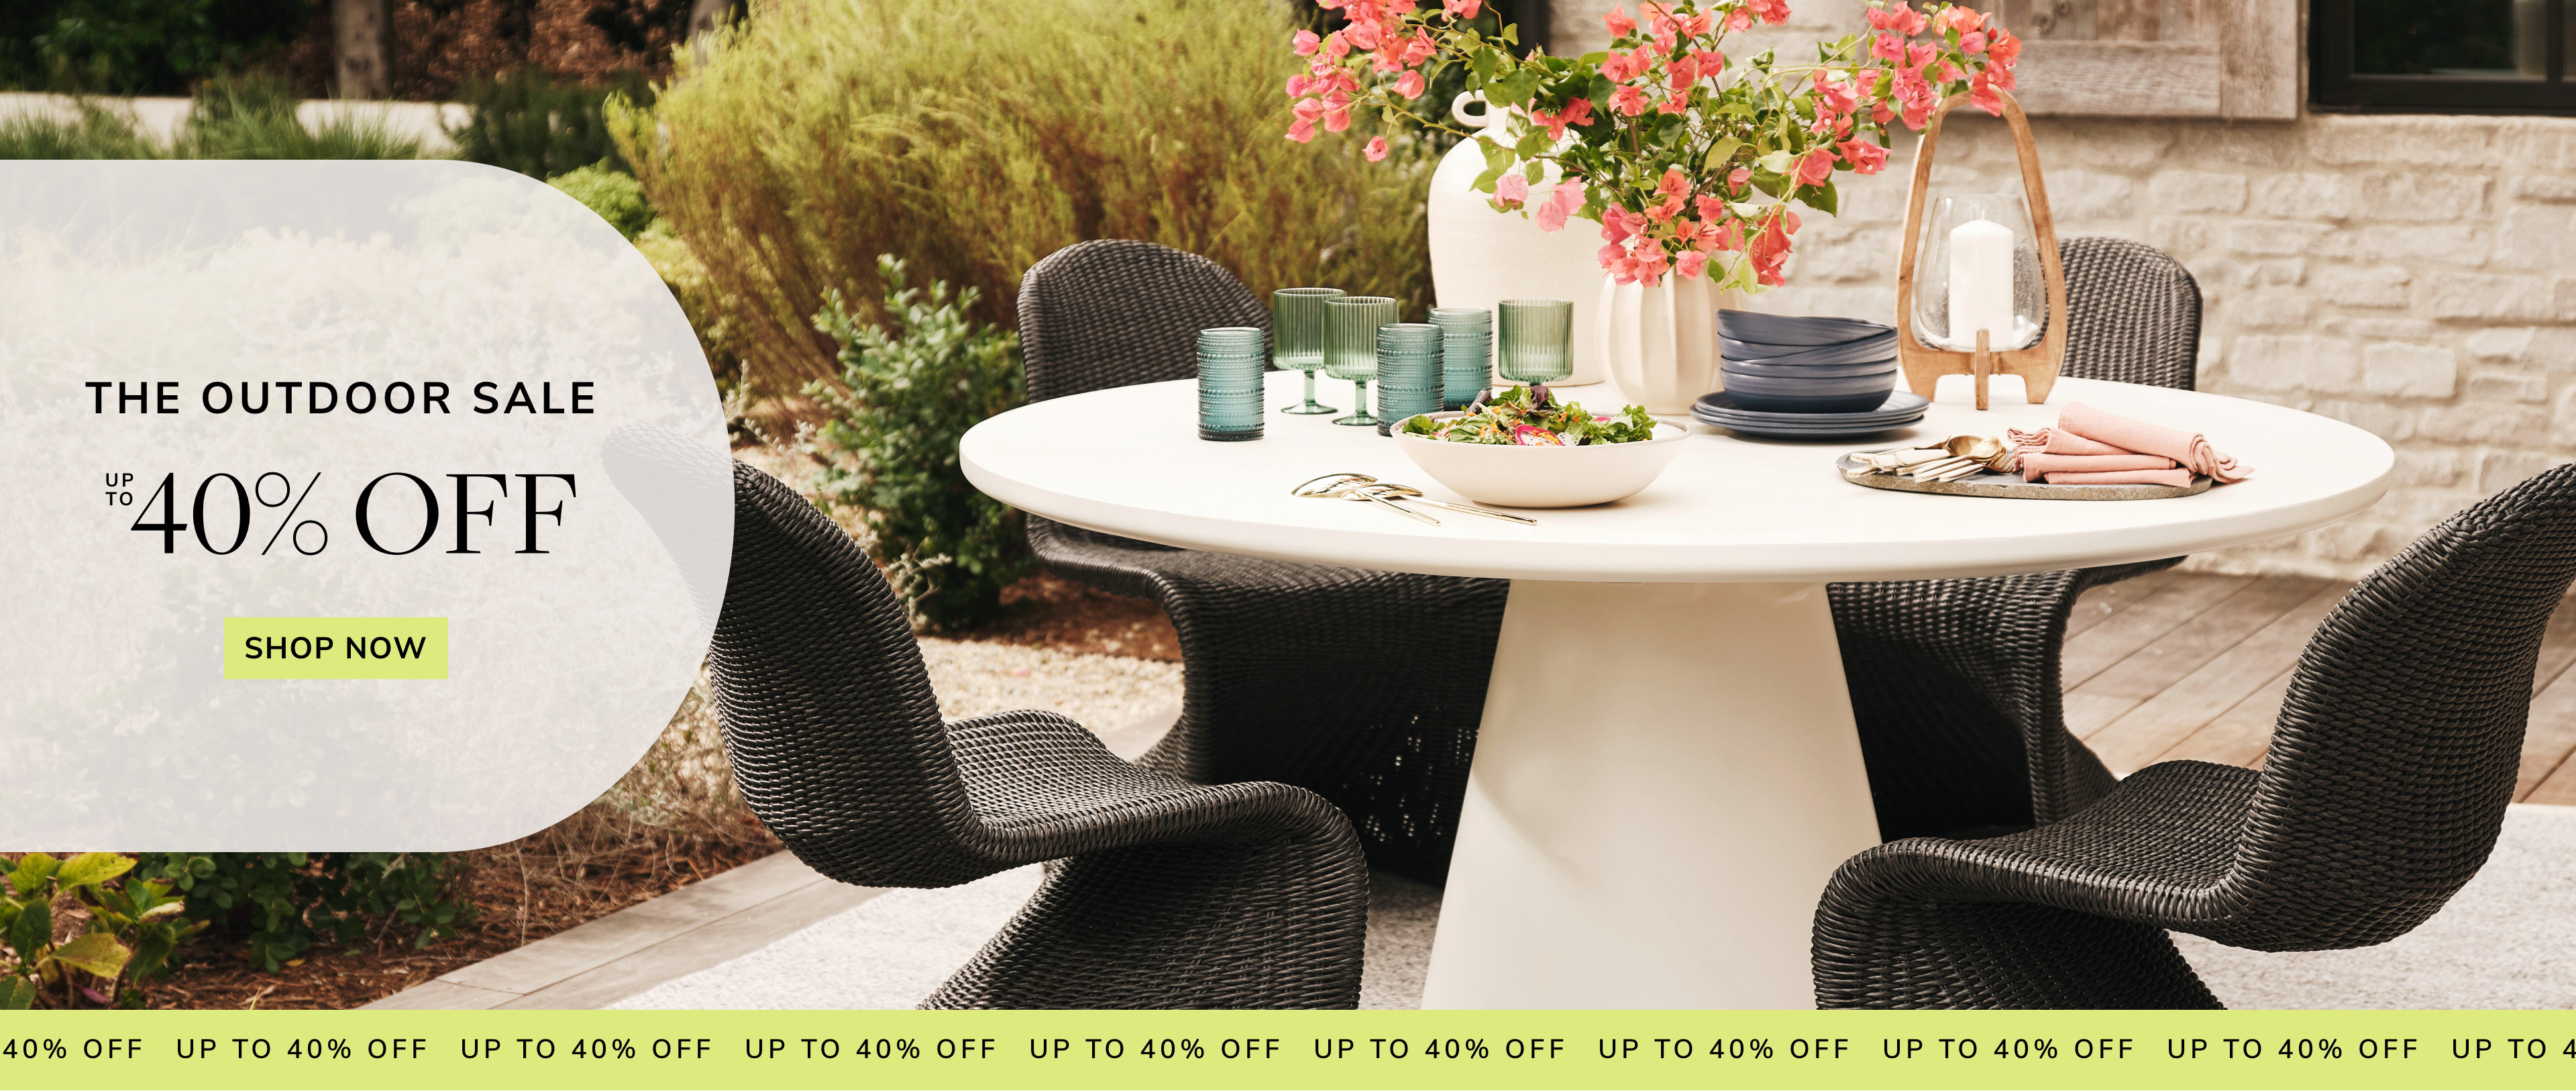 The Outdoor Sale. Up to 40% Off.